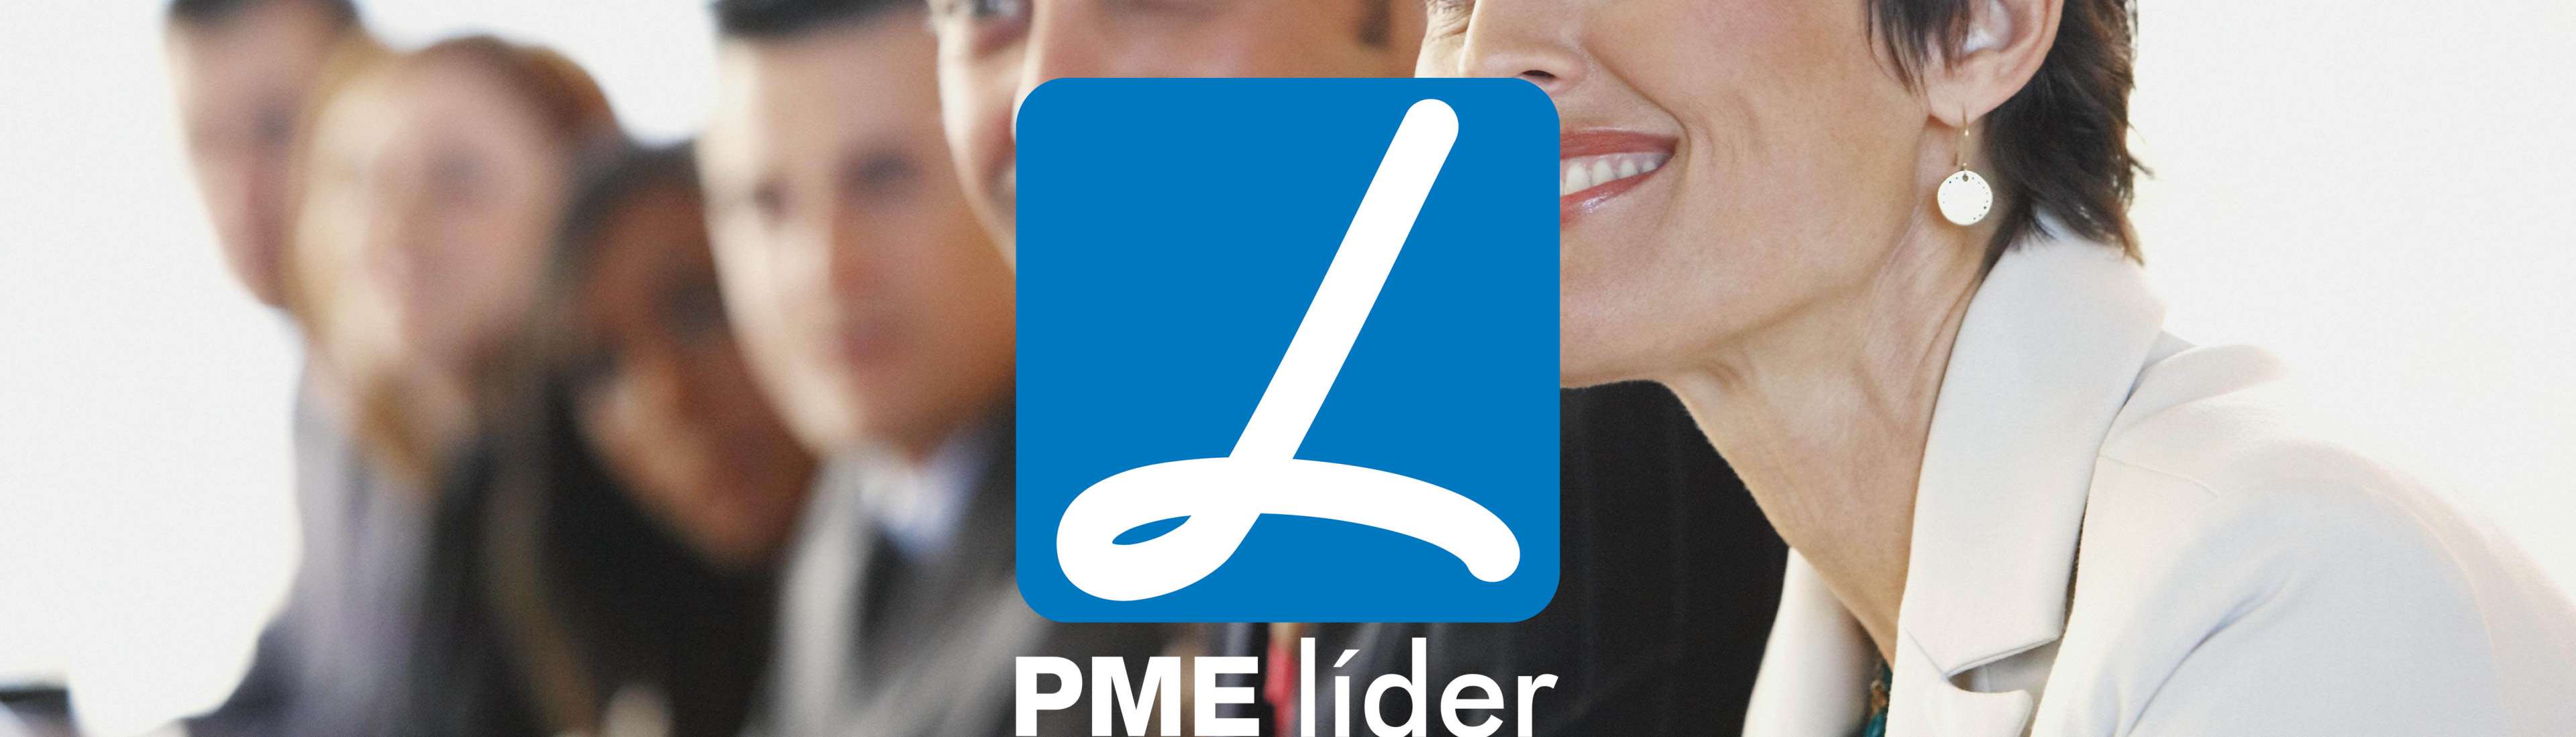 Candidaturas PME